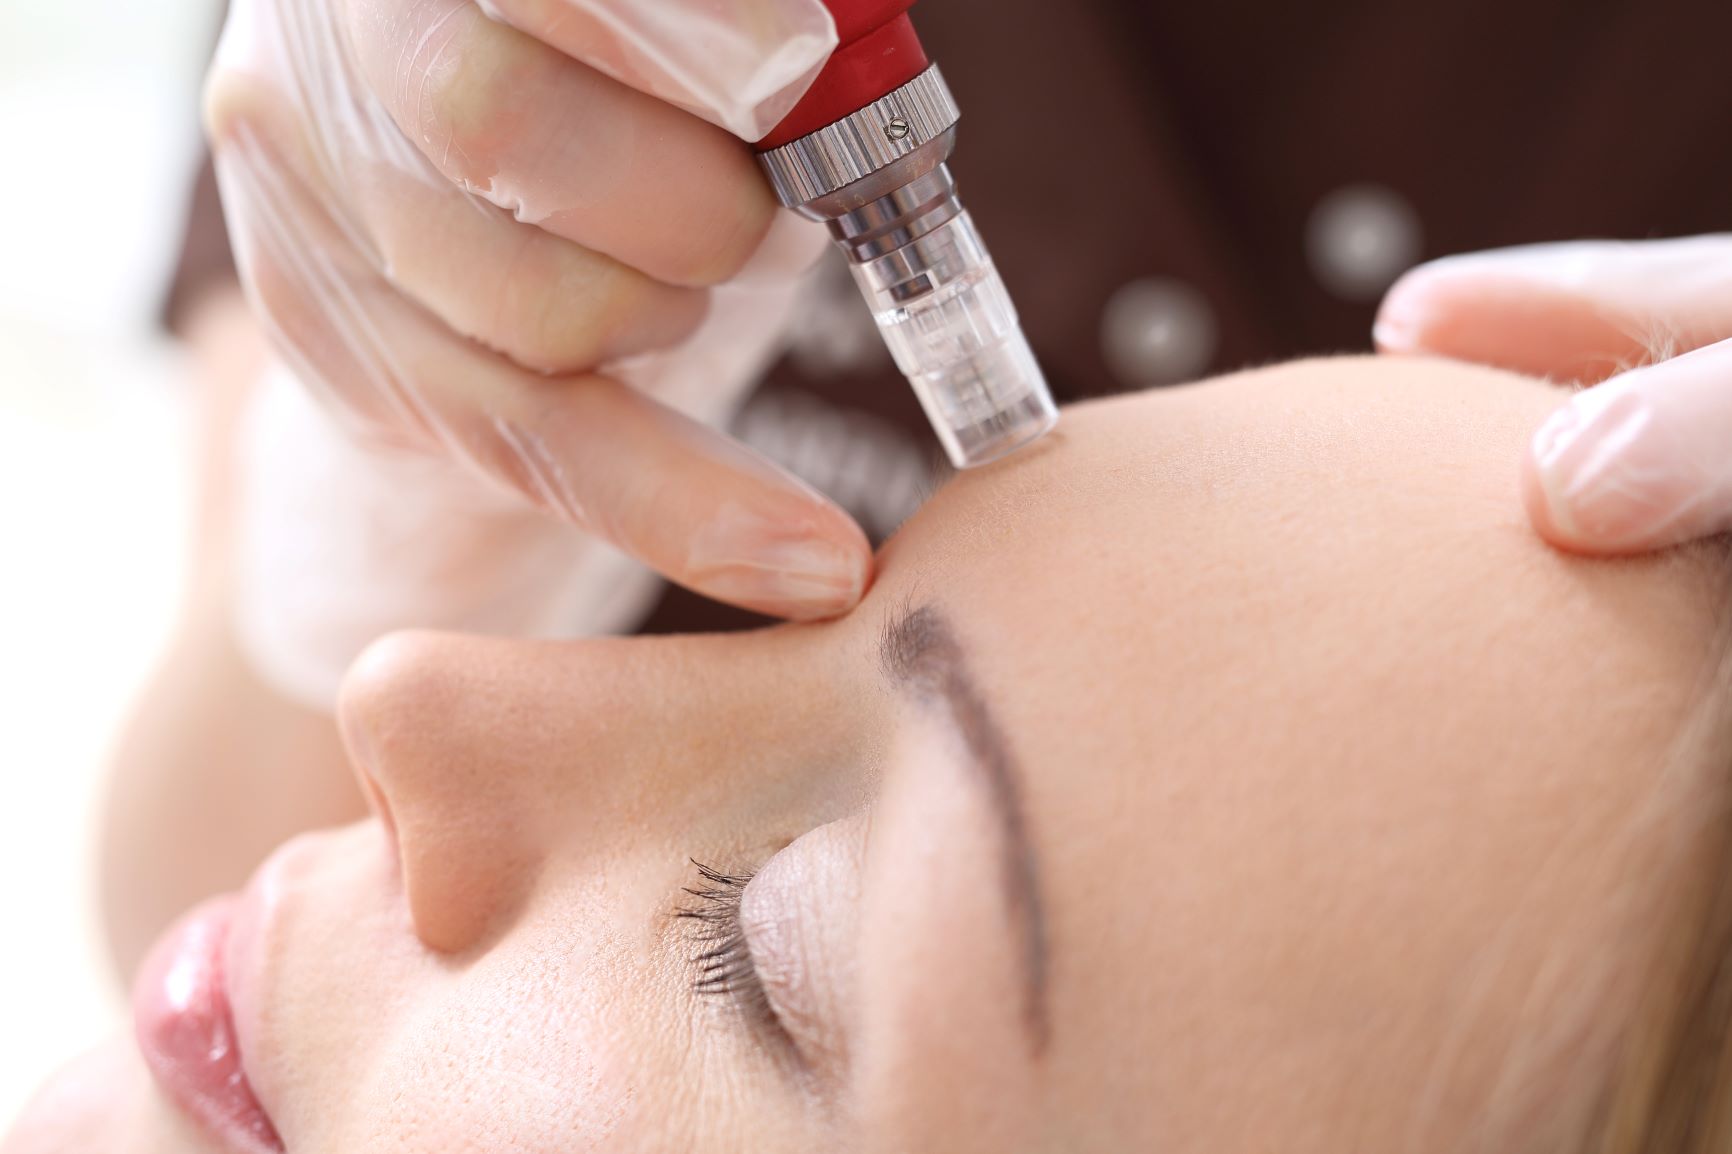 micro needling for acne scars